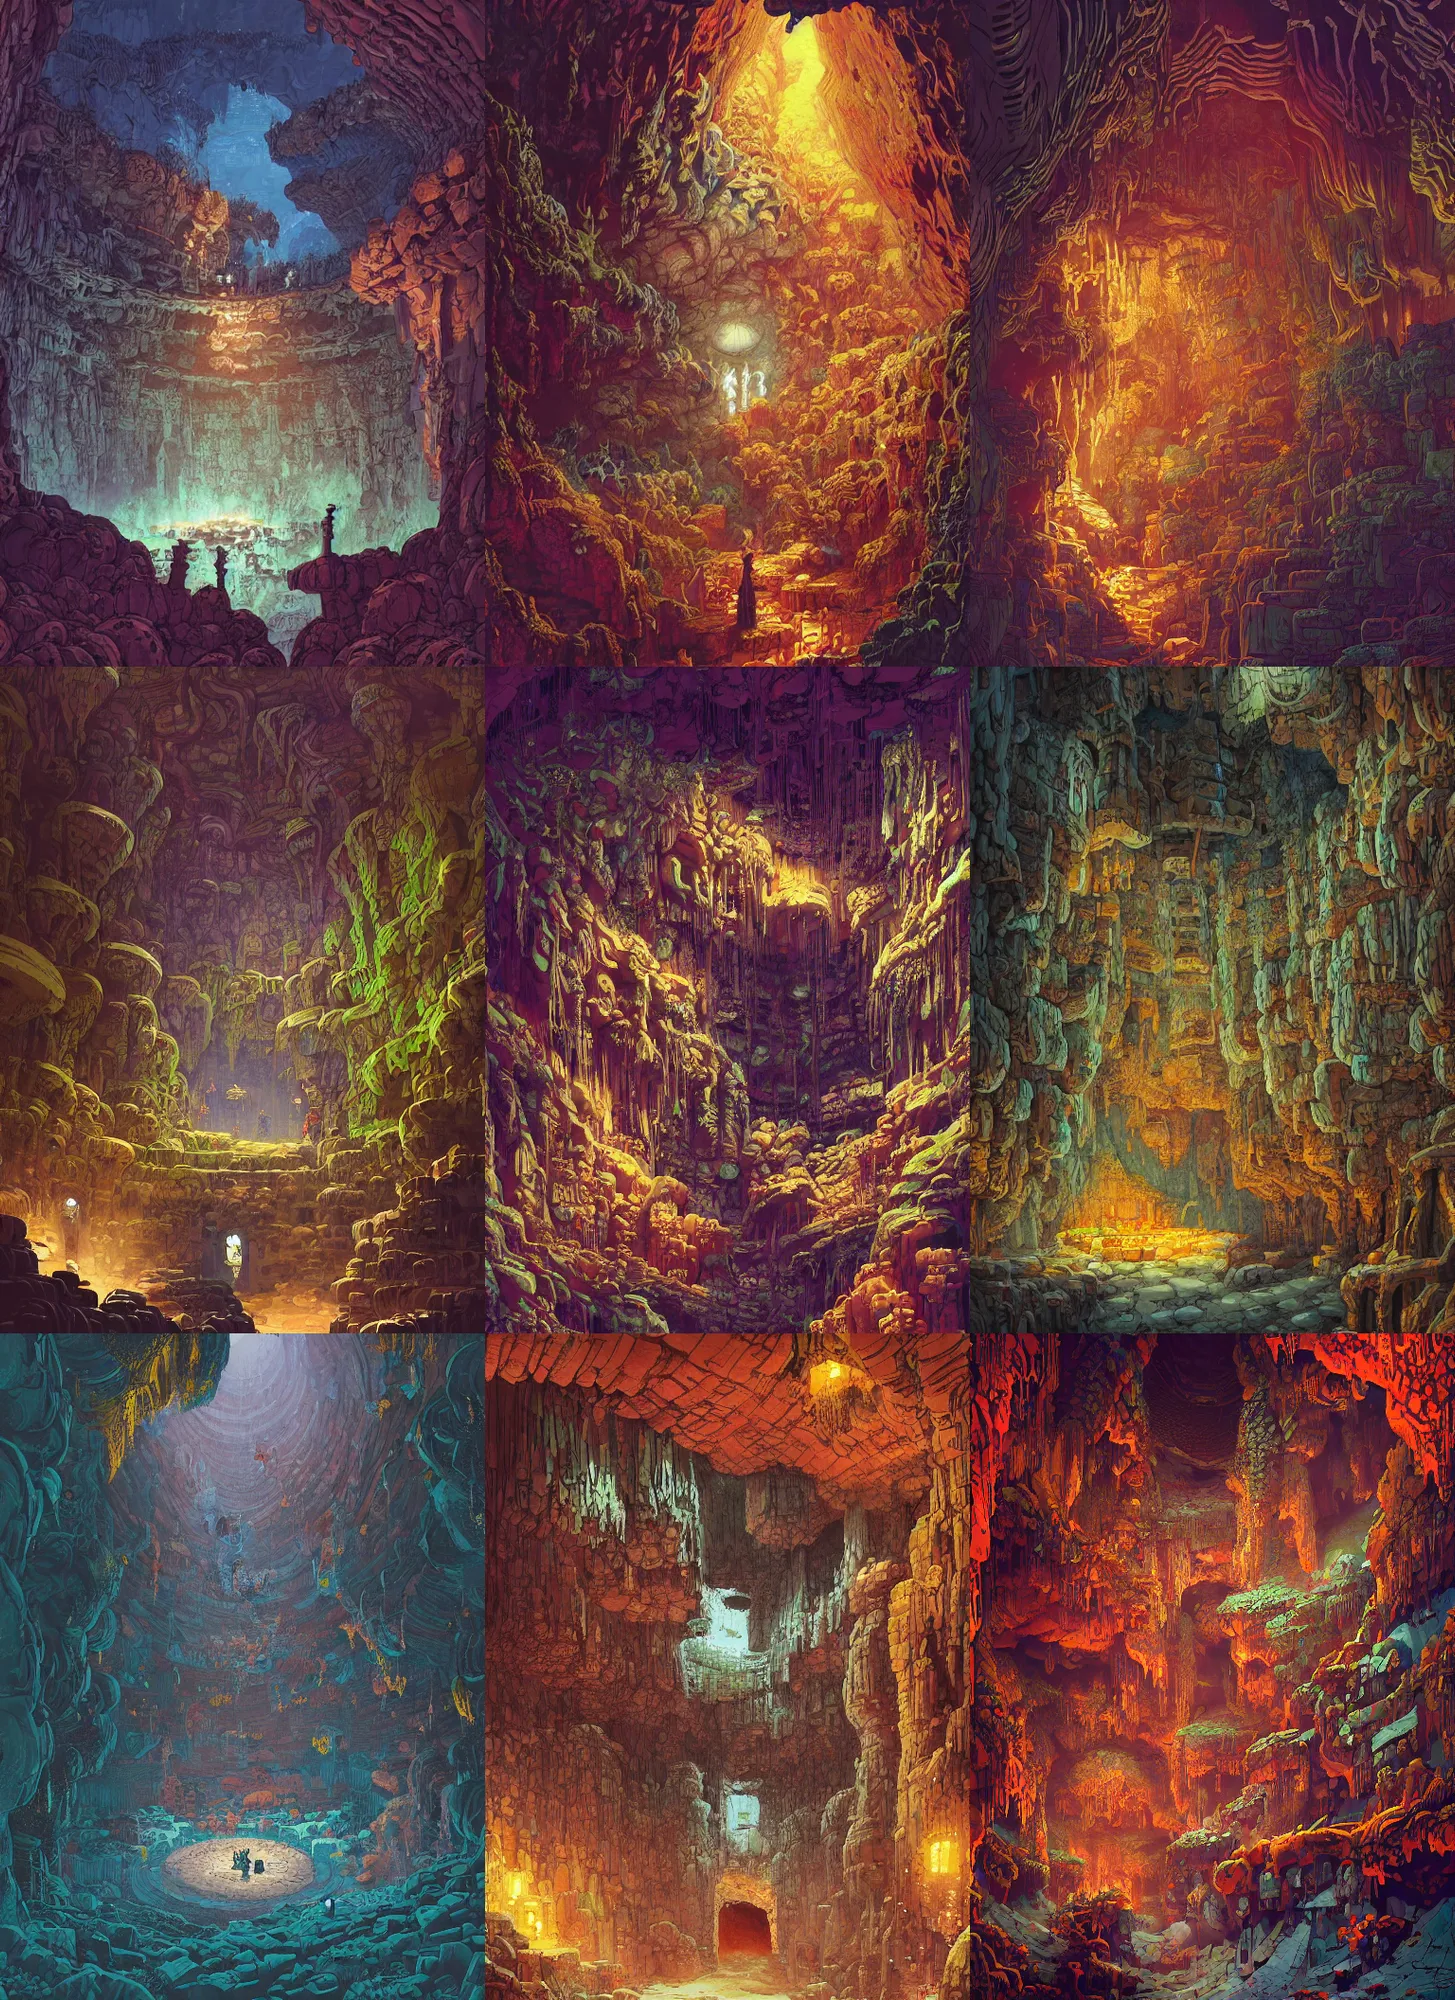 Prompt: a painting of an ancient underground dungeon cavern, intricate, highly detailed, gaudy colors, organic painting, by feng zhu, loish, laurie greasley, victo ngai, andreas rocha, john harris, jesper ejsing, rhads, makoto shinkai, lois van baarle,